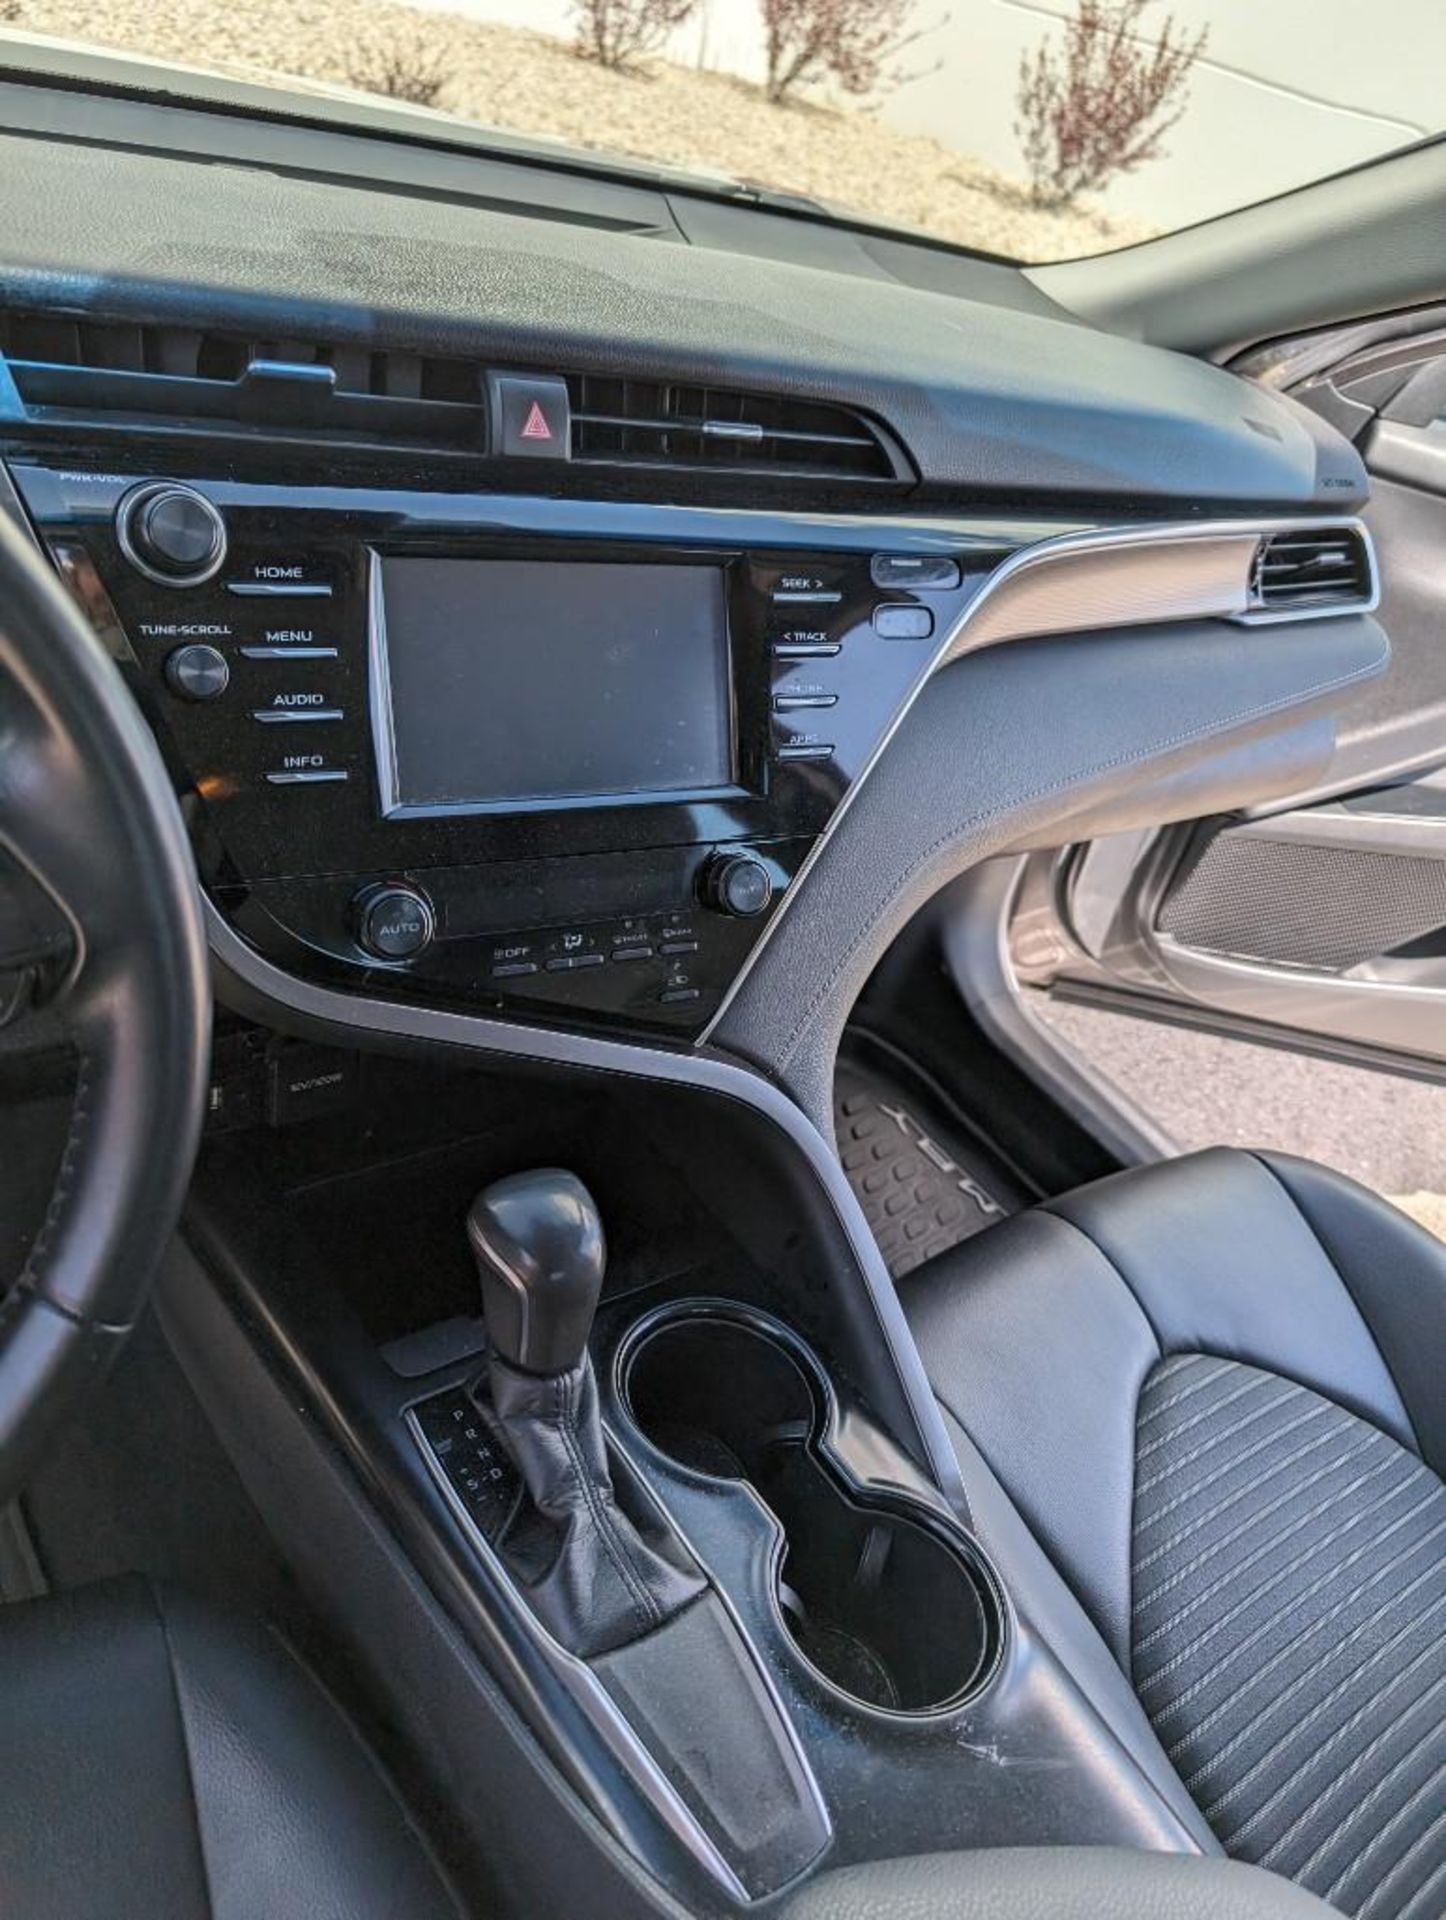 2018 Toyota Camry SE w/ 101,344 Miles, FWD 4 cylinder VIN #: 4T1B11HK2JU024047 Features and Notes: r - Image 10 of 16